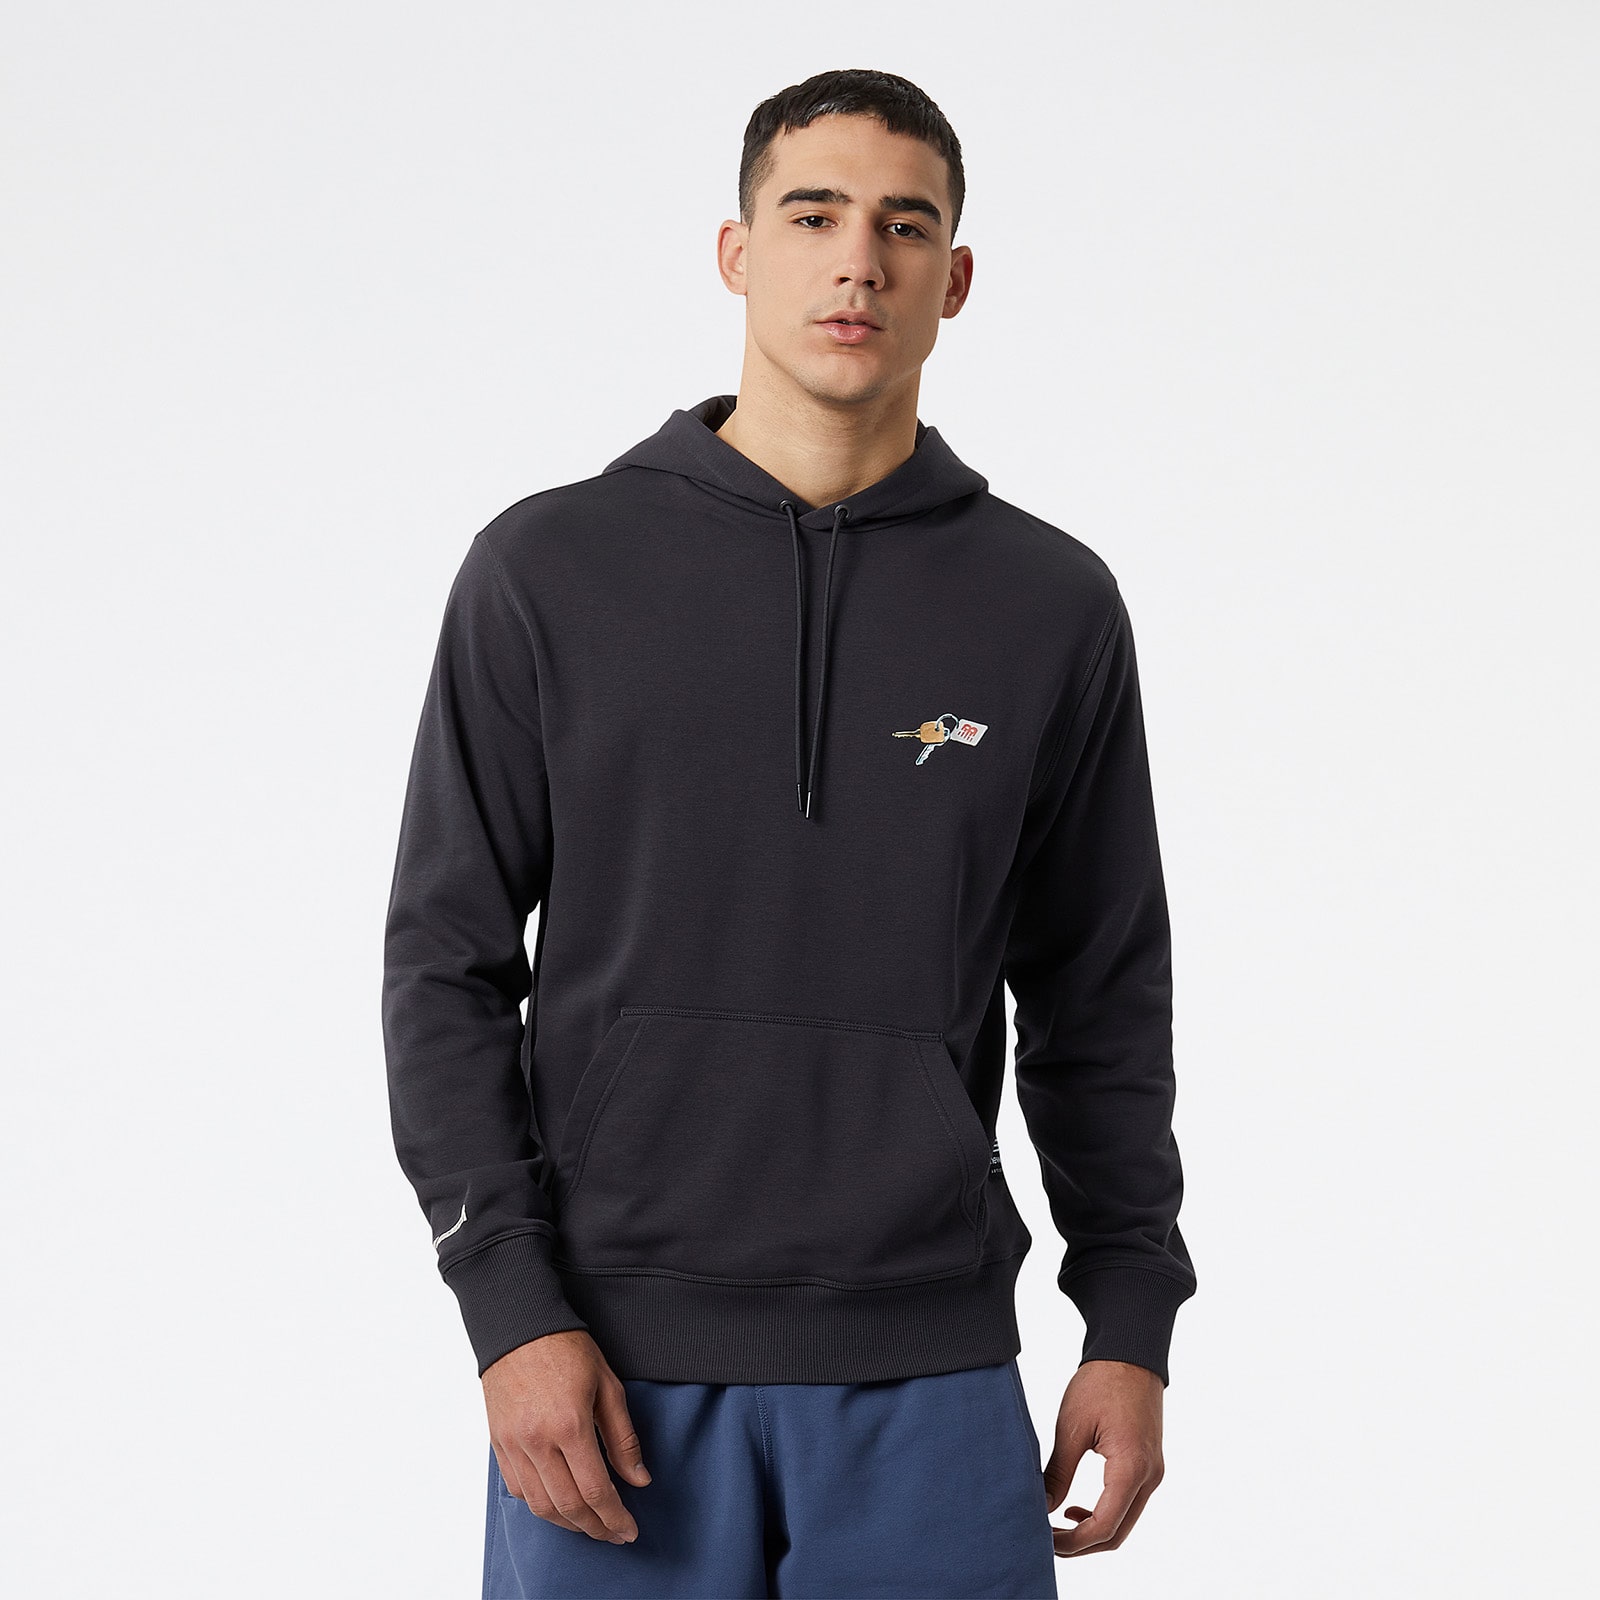 NB Athletics Jacob Rochester Sweat Pullover Hoodie